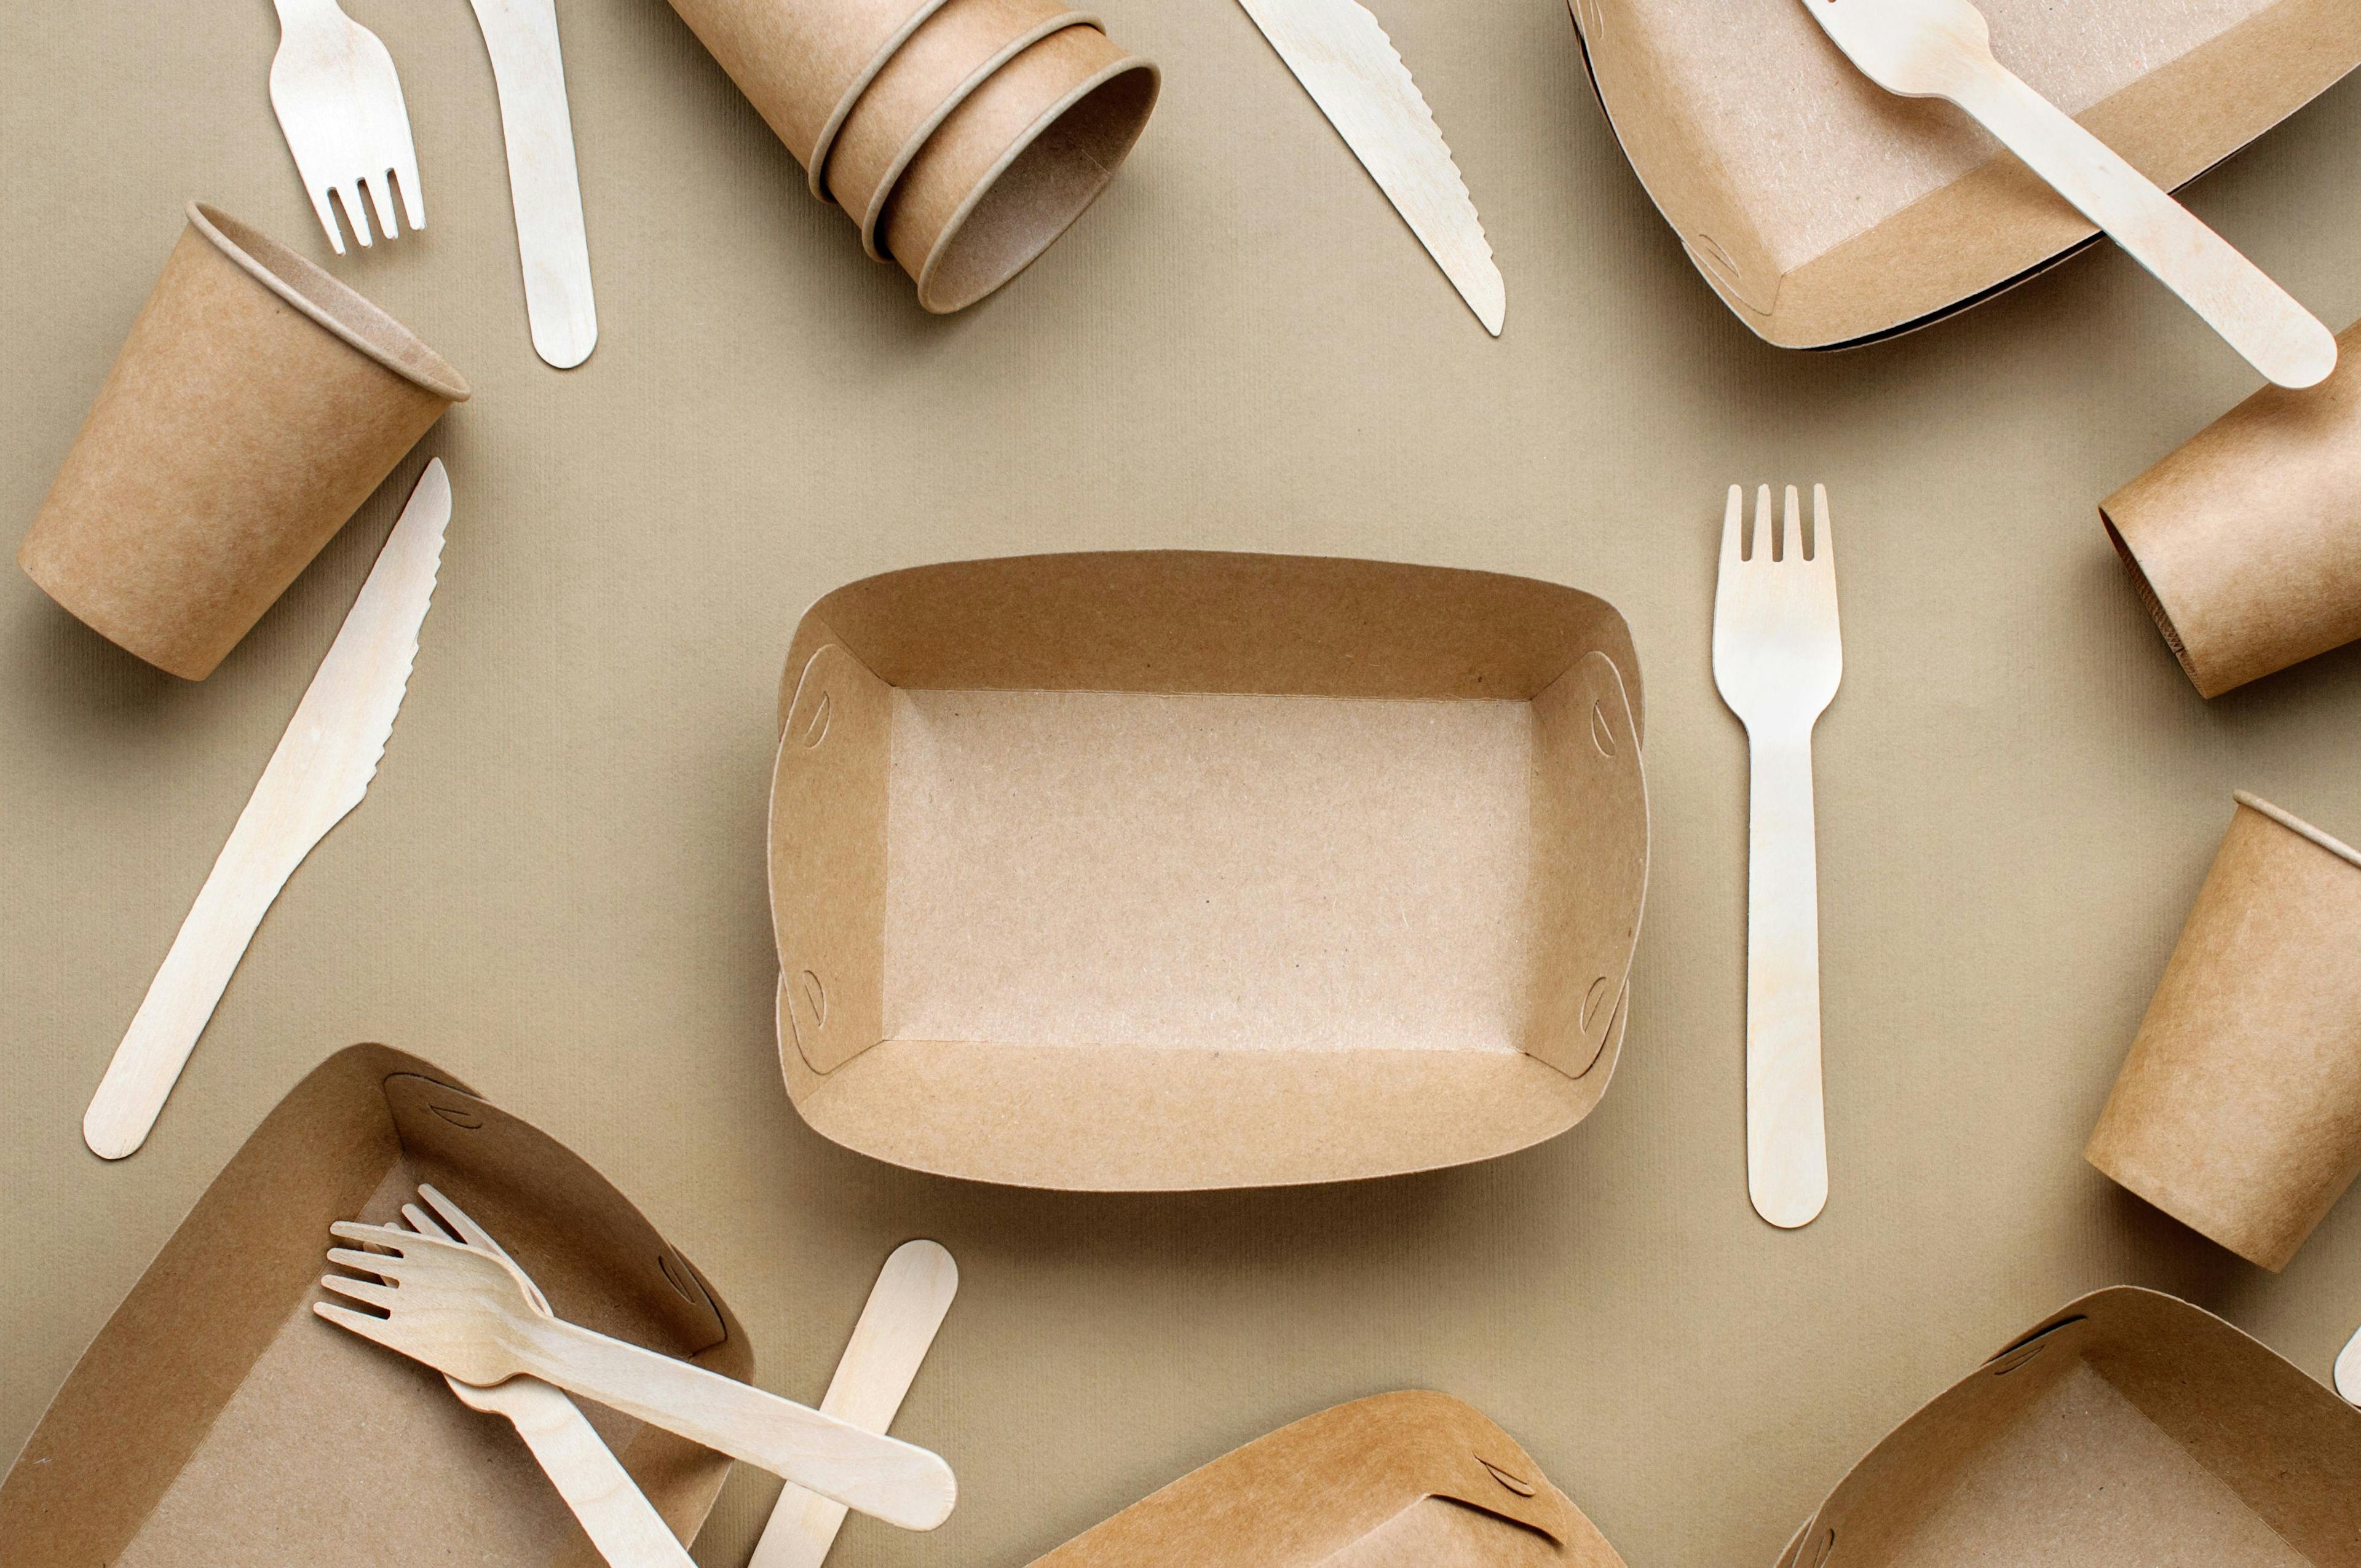 Brown kraft paper food containers, forks and knifes on beige background | Image Credit: © lithiumphoto - stock.adobe.com